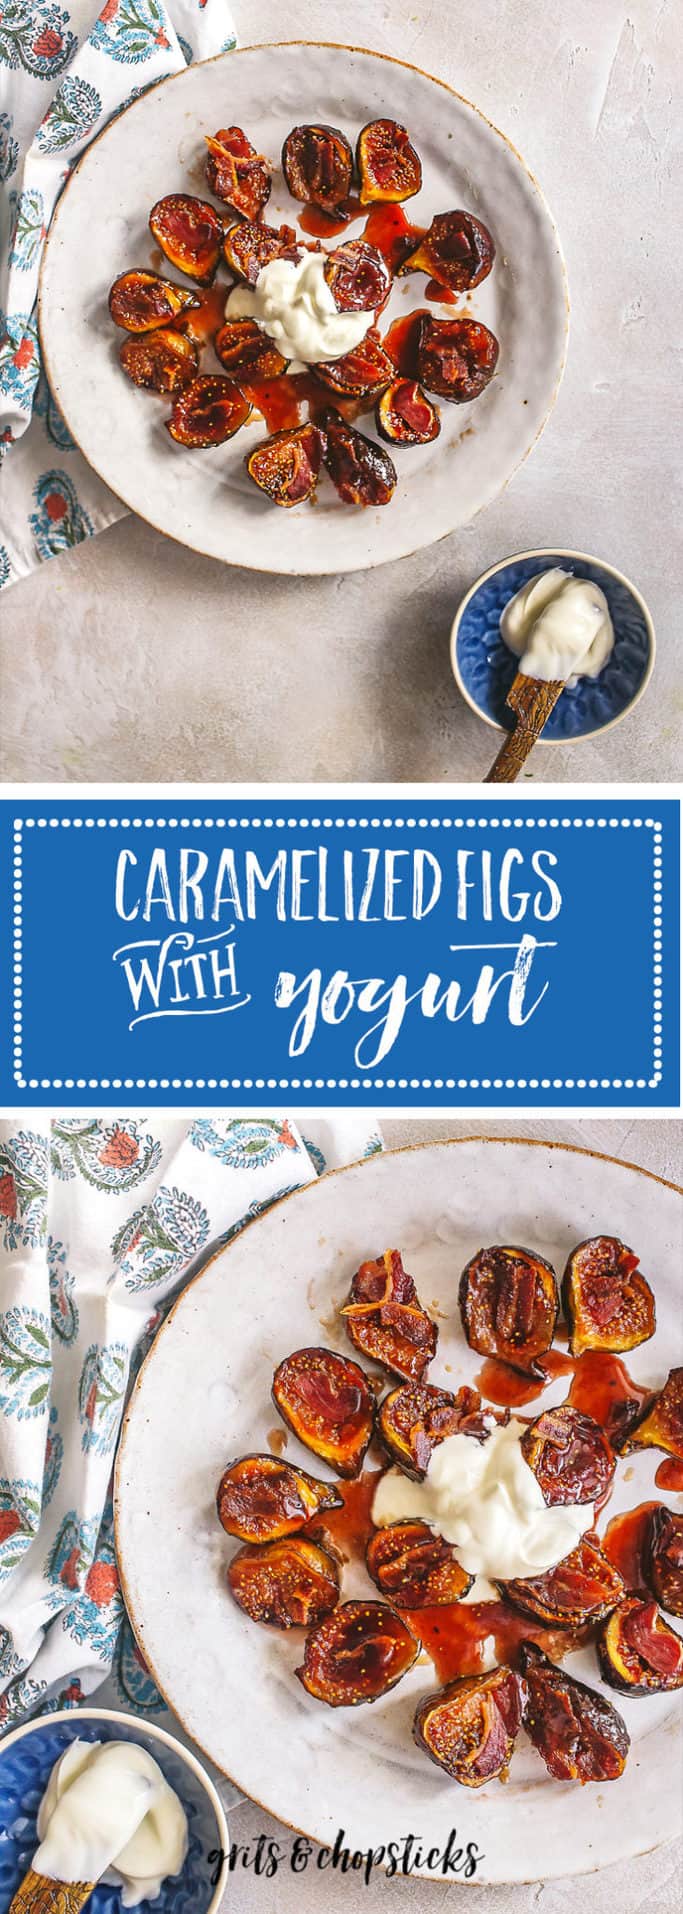 Check out these caramelized figs with yogurt and crispy bacon for your next indulgent (but quick) breakfast treat!